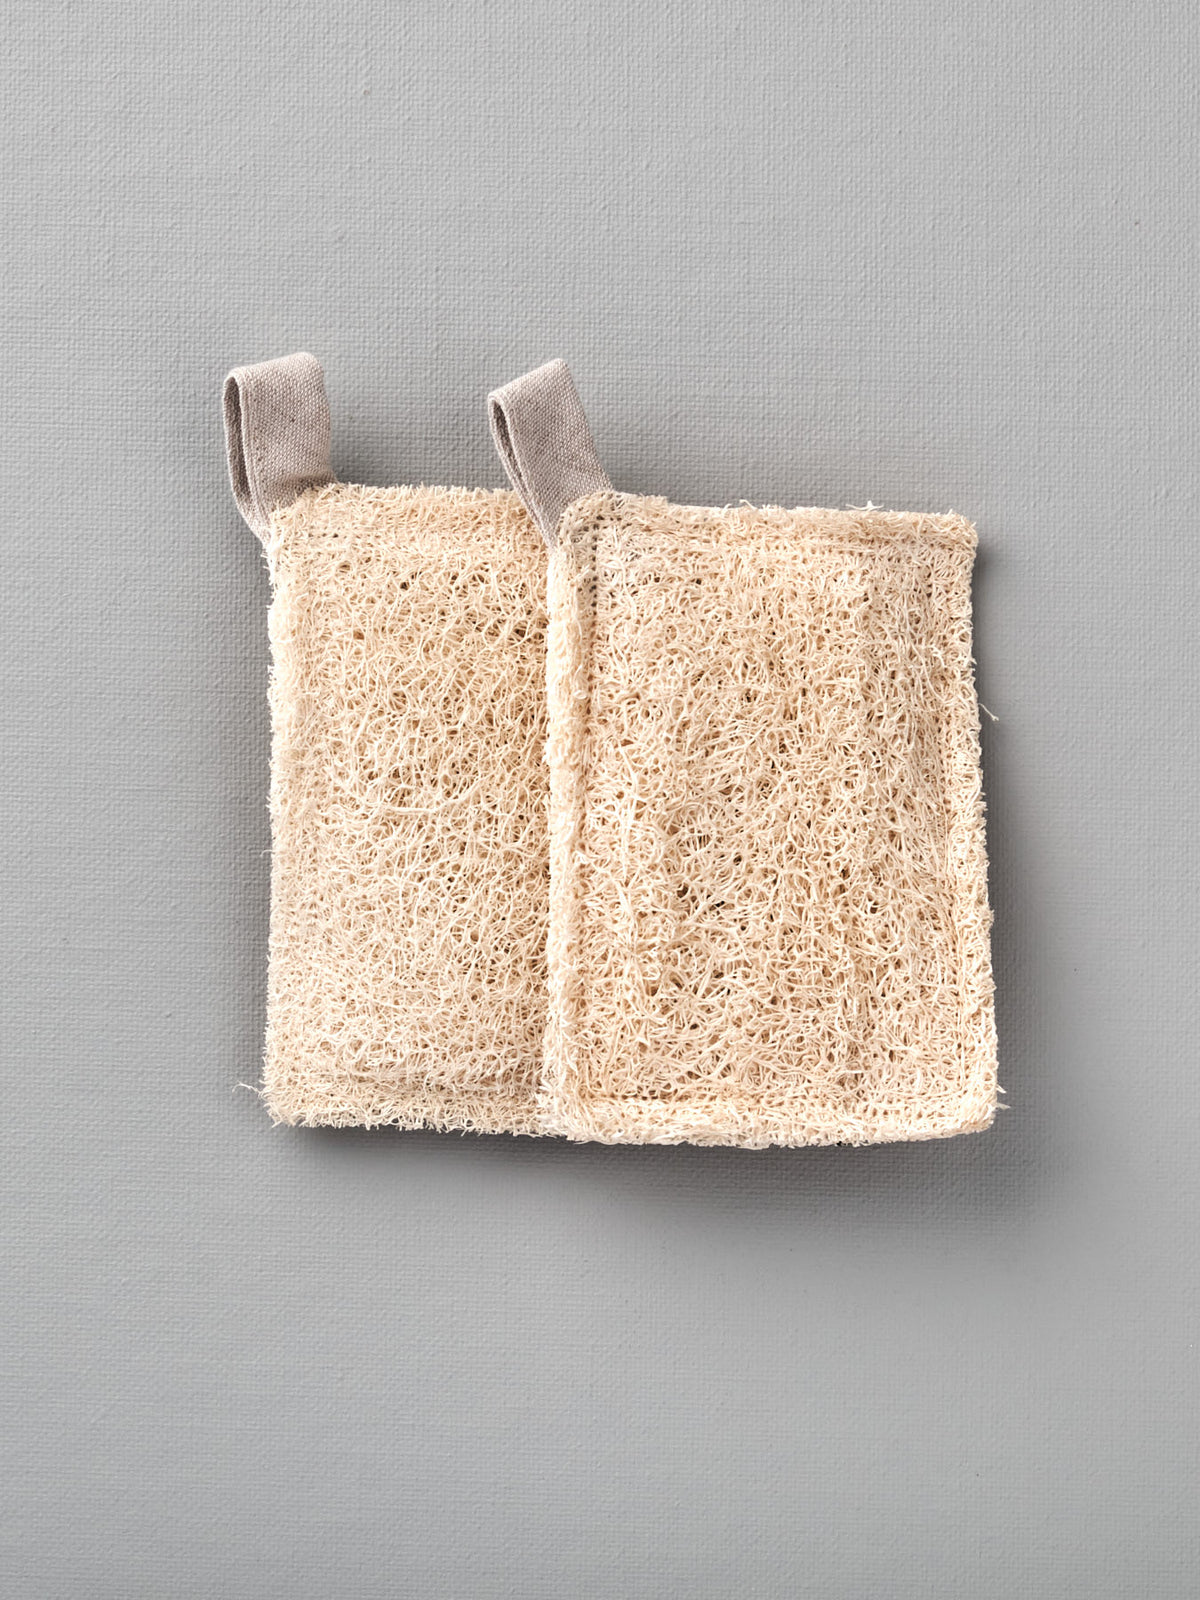 A pair of Loofah Scouring Pad – 2pk on a grey background from Iris Hantverk.